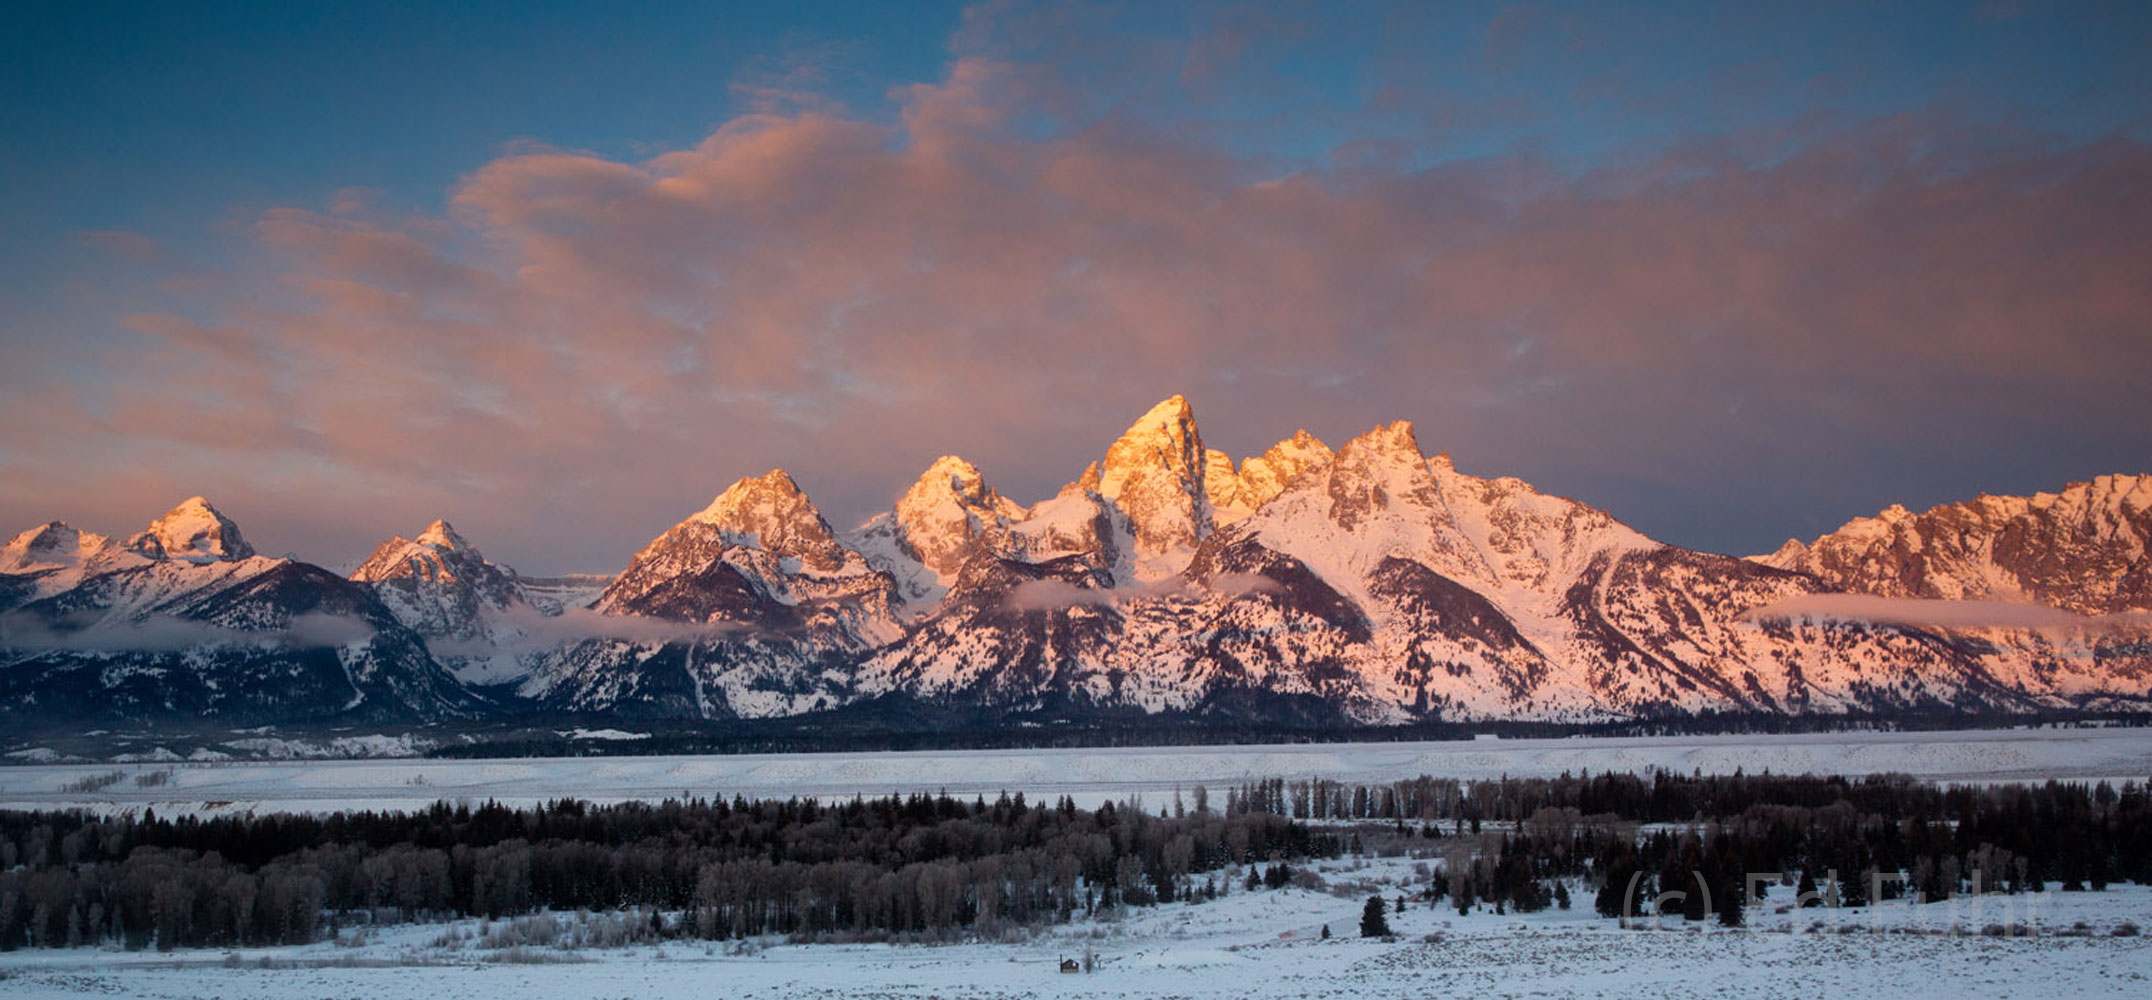 Sunrise glow lights the clouds above Schwabacher's Landing and the beaver ponds on this winter morning.